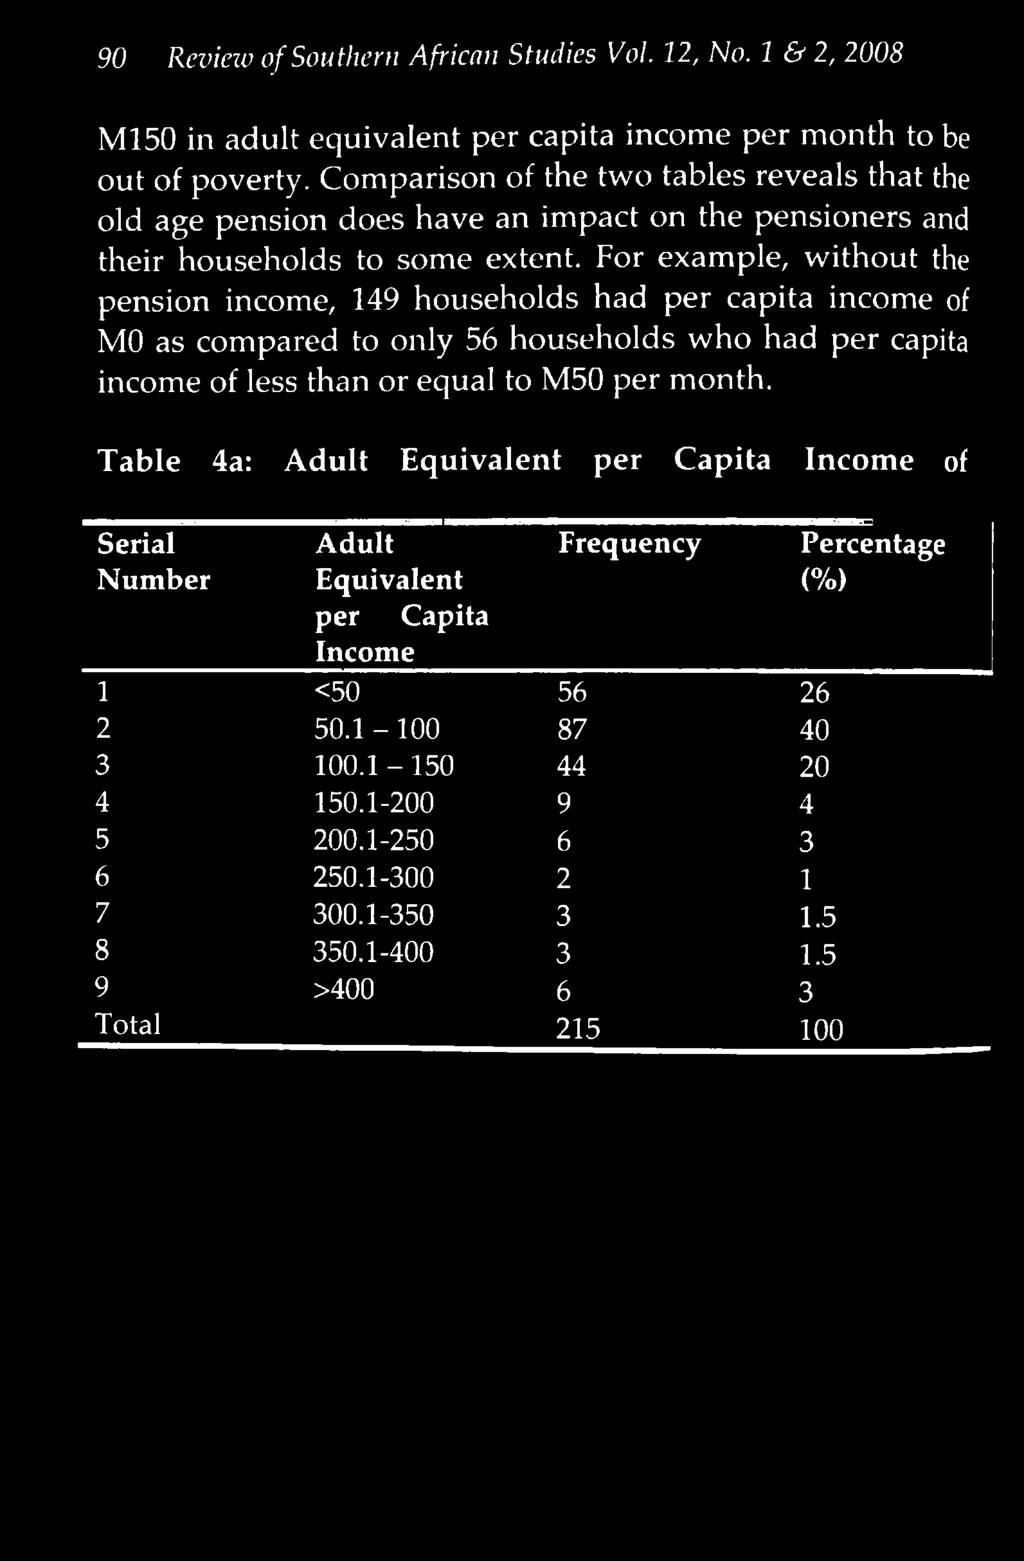 For exam ple, w ithout the pension income, 149 households had per capita income of MO as compared to only 56 households who